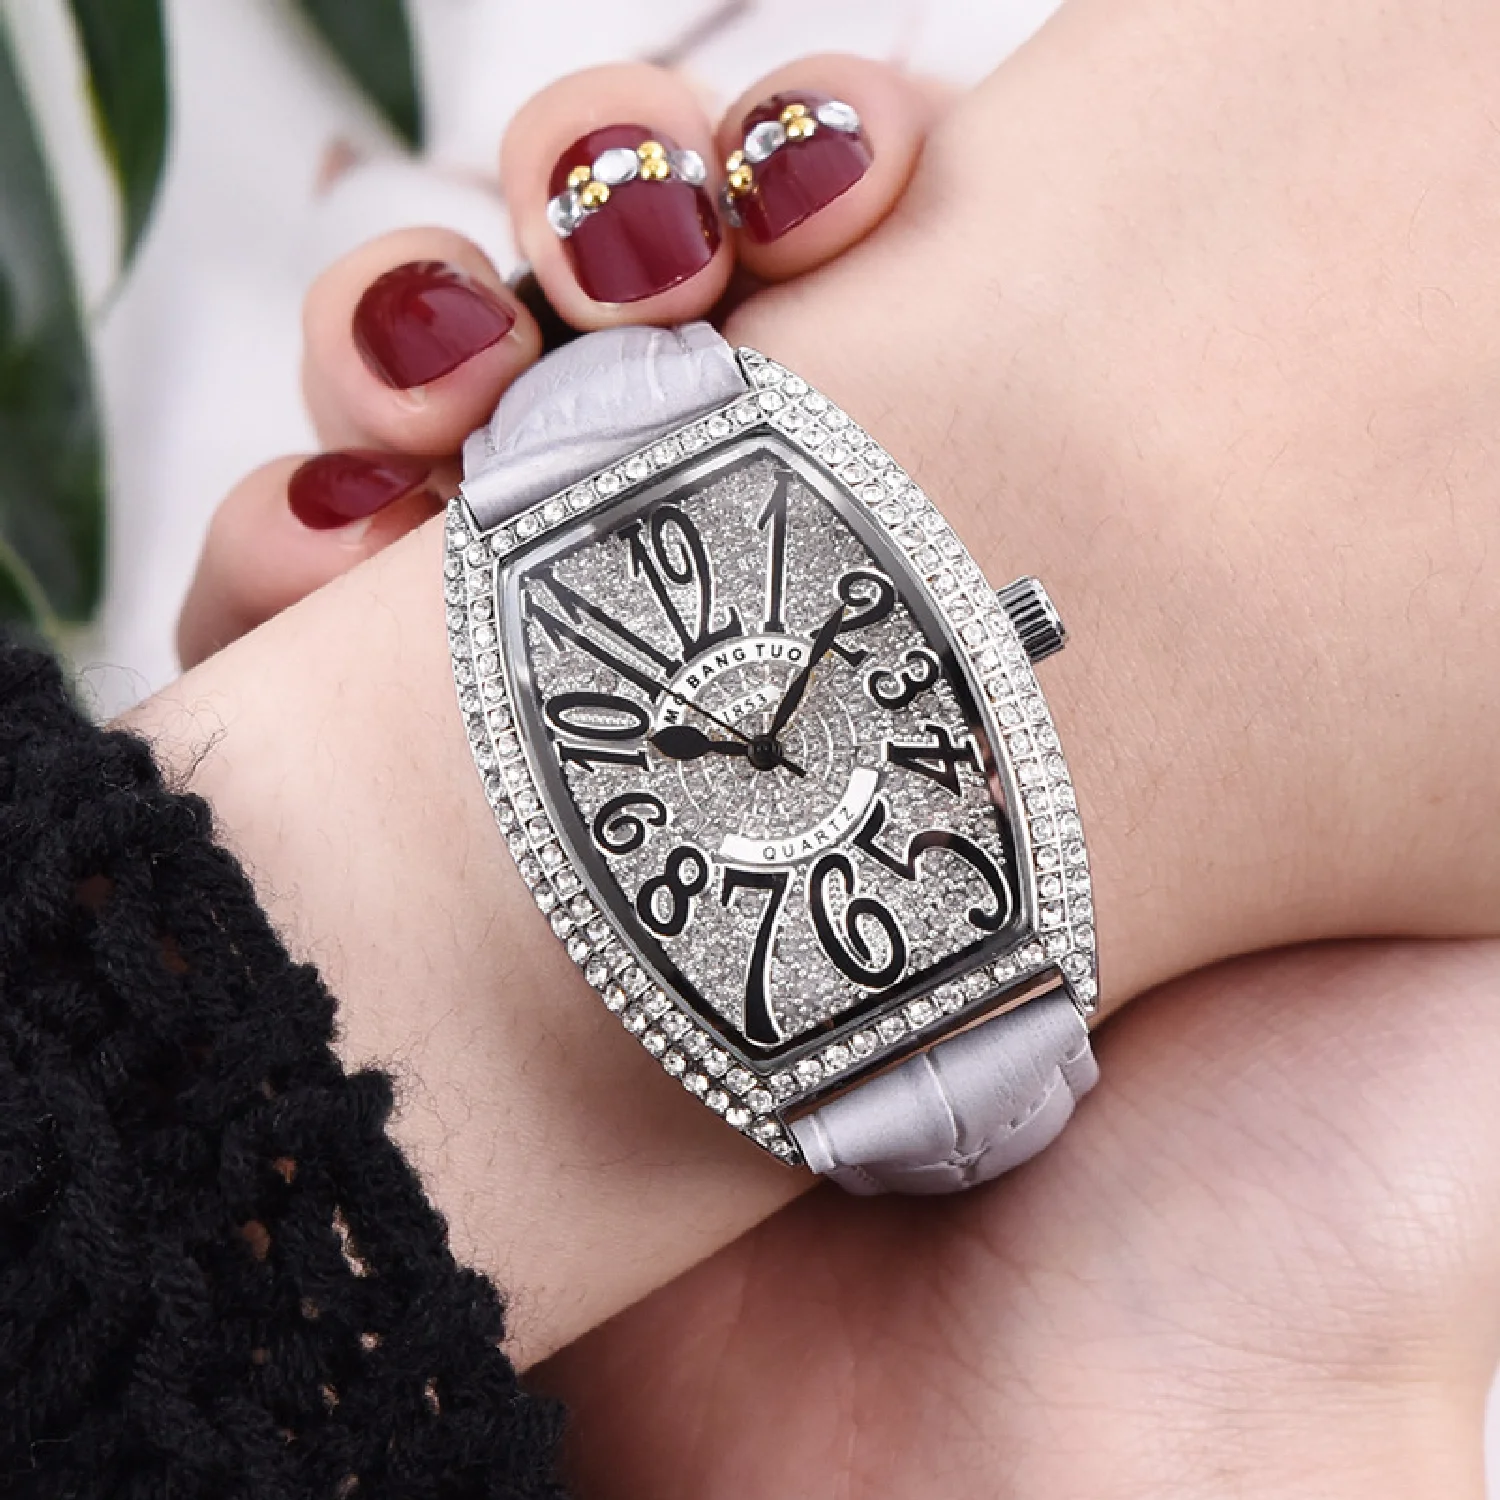 Women Tonneau Watch Top Brand Luxury AAA Franck Ladies Quartz Pink Leather Band Diamond Watches Woman Jewelry For Gift Clock enlarge